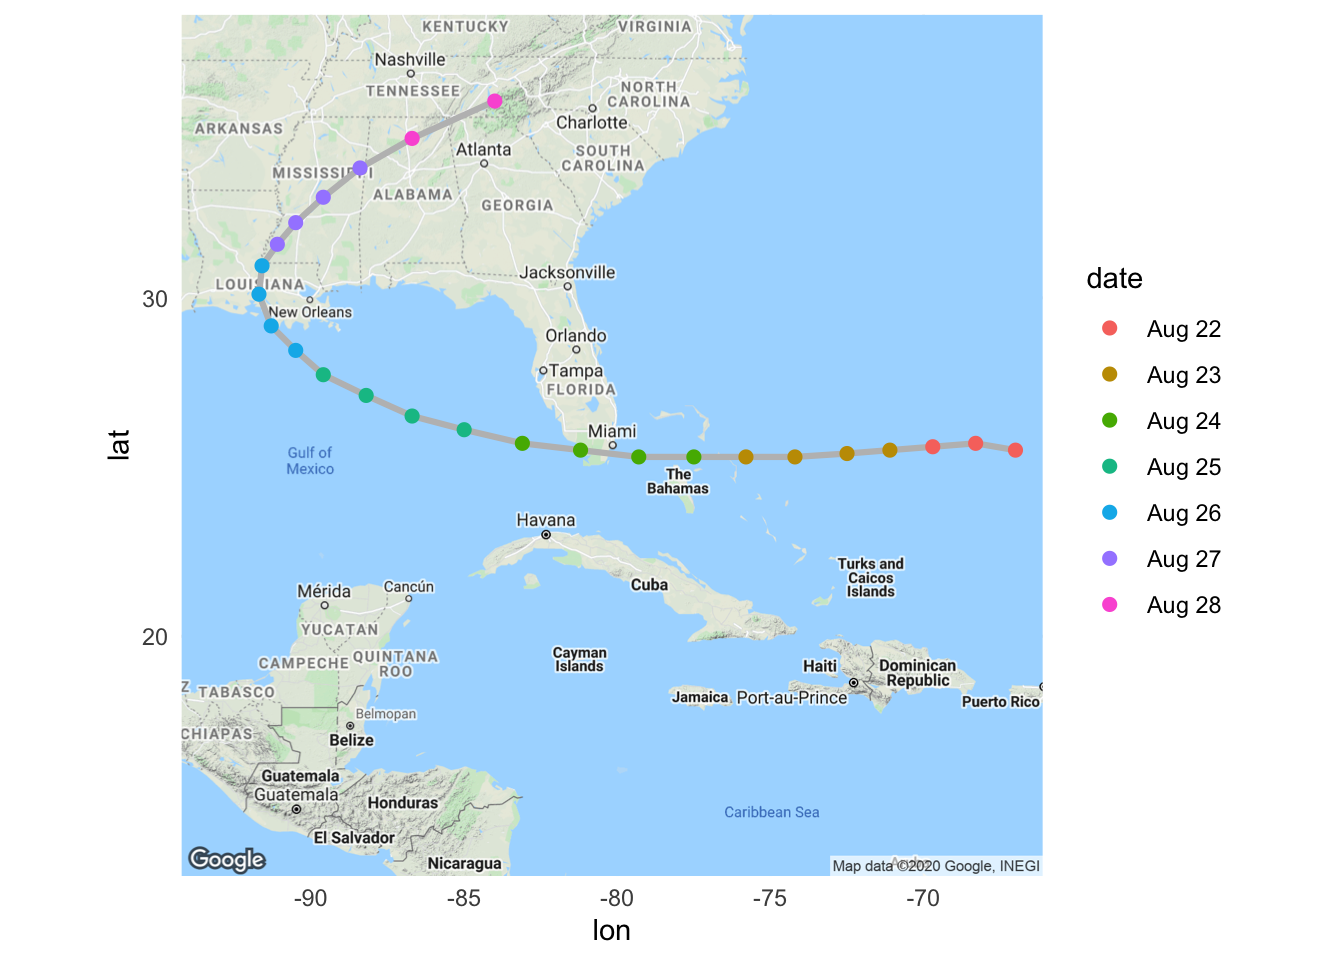 Hurricane Andrew tracks by date, based on UTC date times.